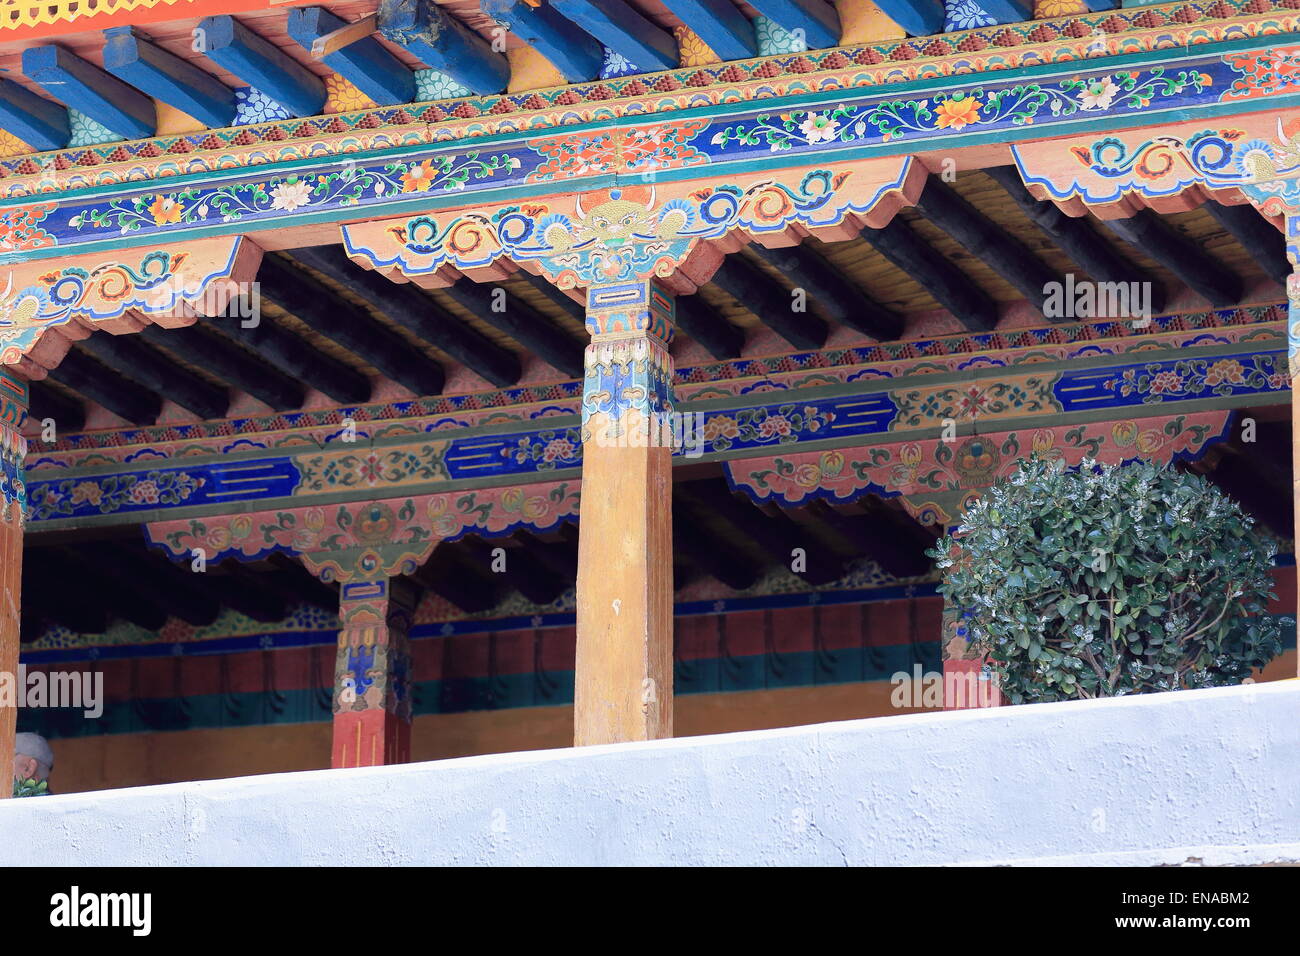 Manycolored wooden balcony showing buddhist decorative elements in the 642 AD.founded-25000 m2 Jokhang-House of Buddha. Lhasa. Stock Photo